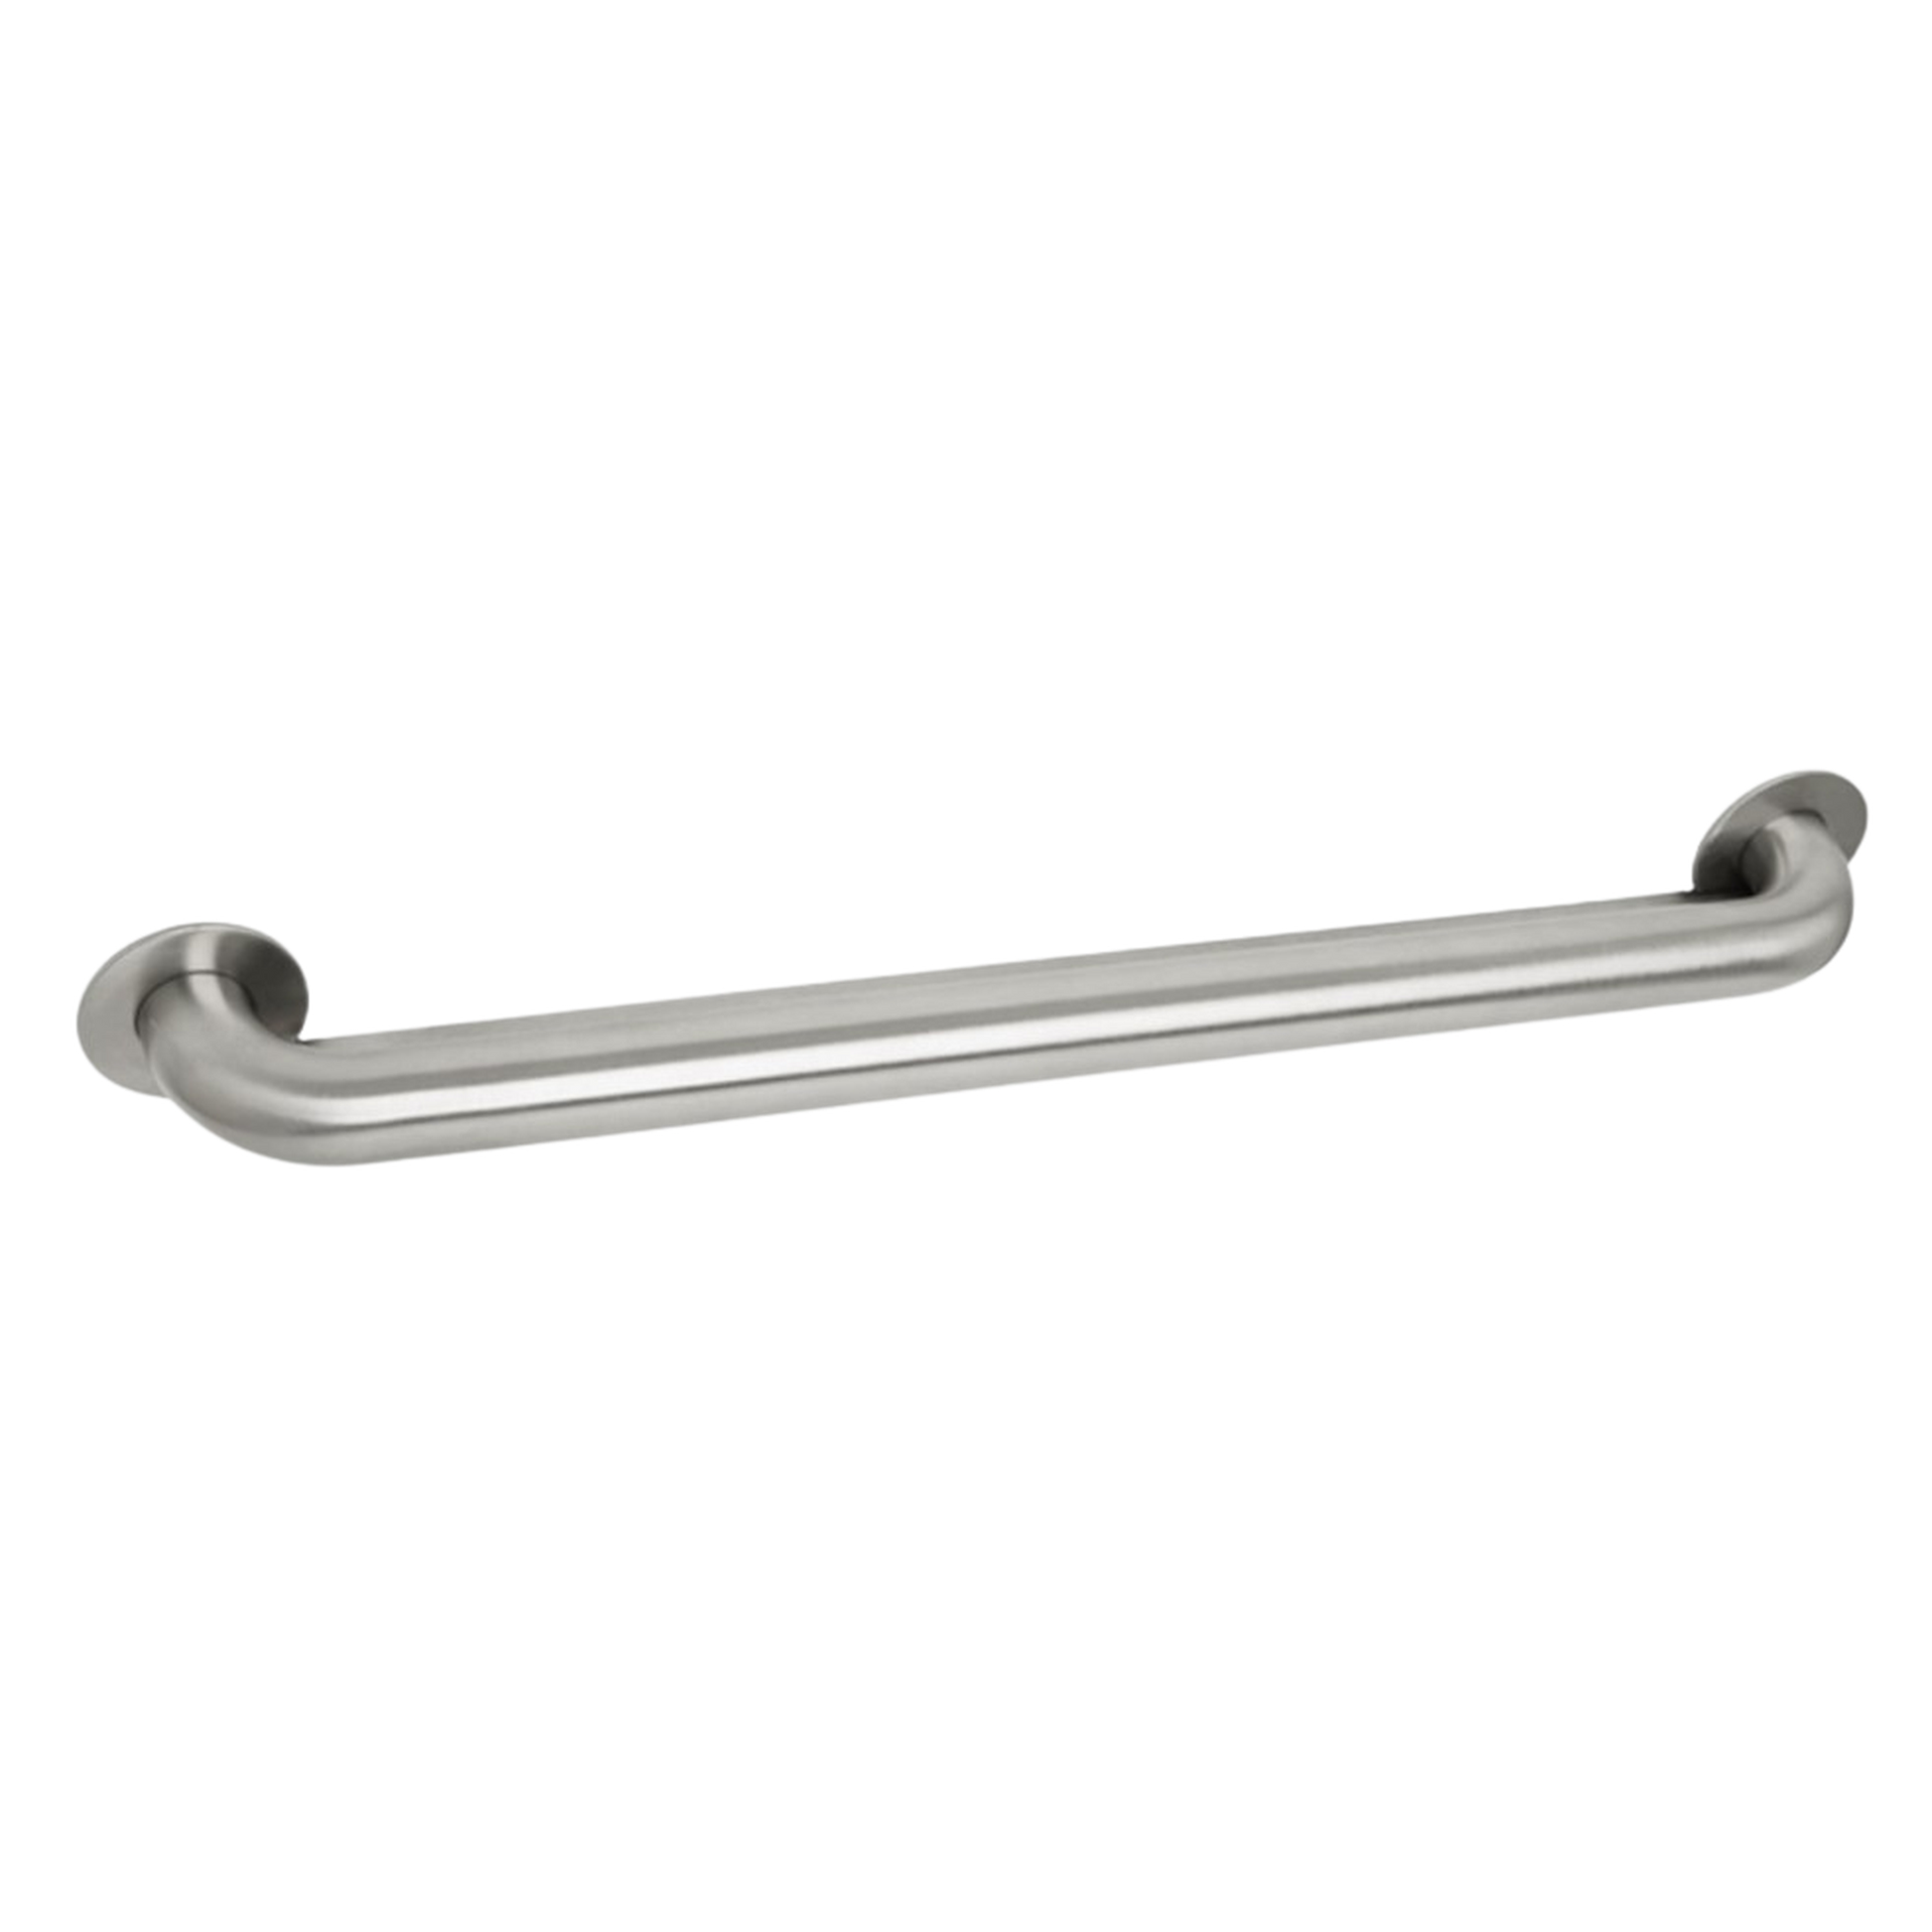 Seachrome Signature Series 48" Satin Stainless Steel 1.5 Diameter Exposed Mounting Flange Without Hole Standard Ligature Resistant Grab Bar